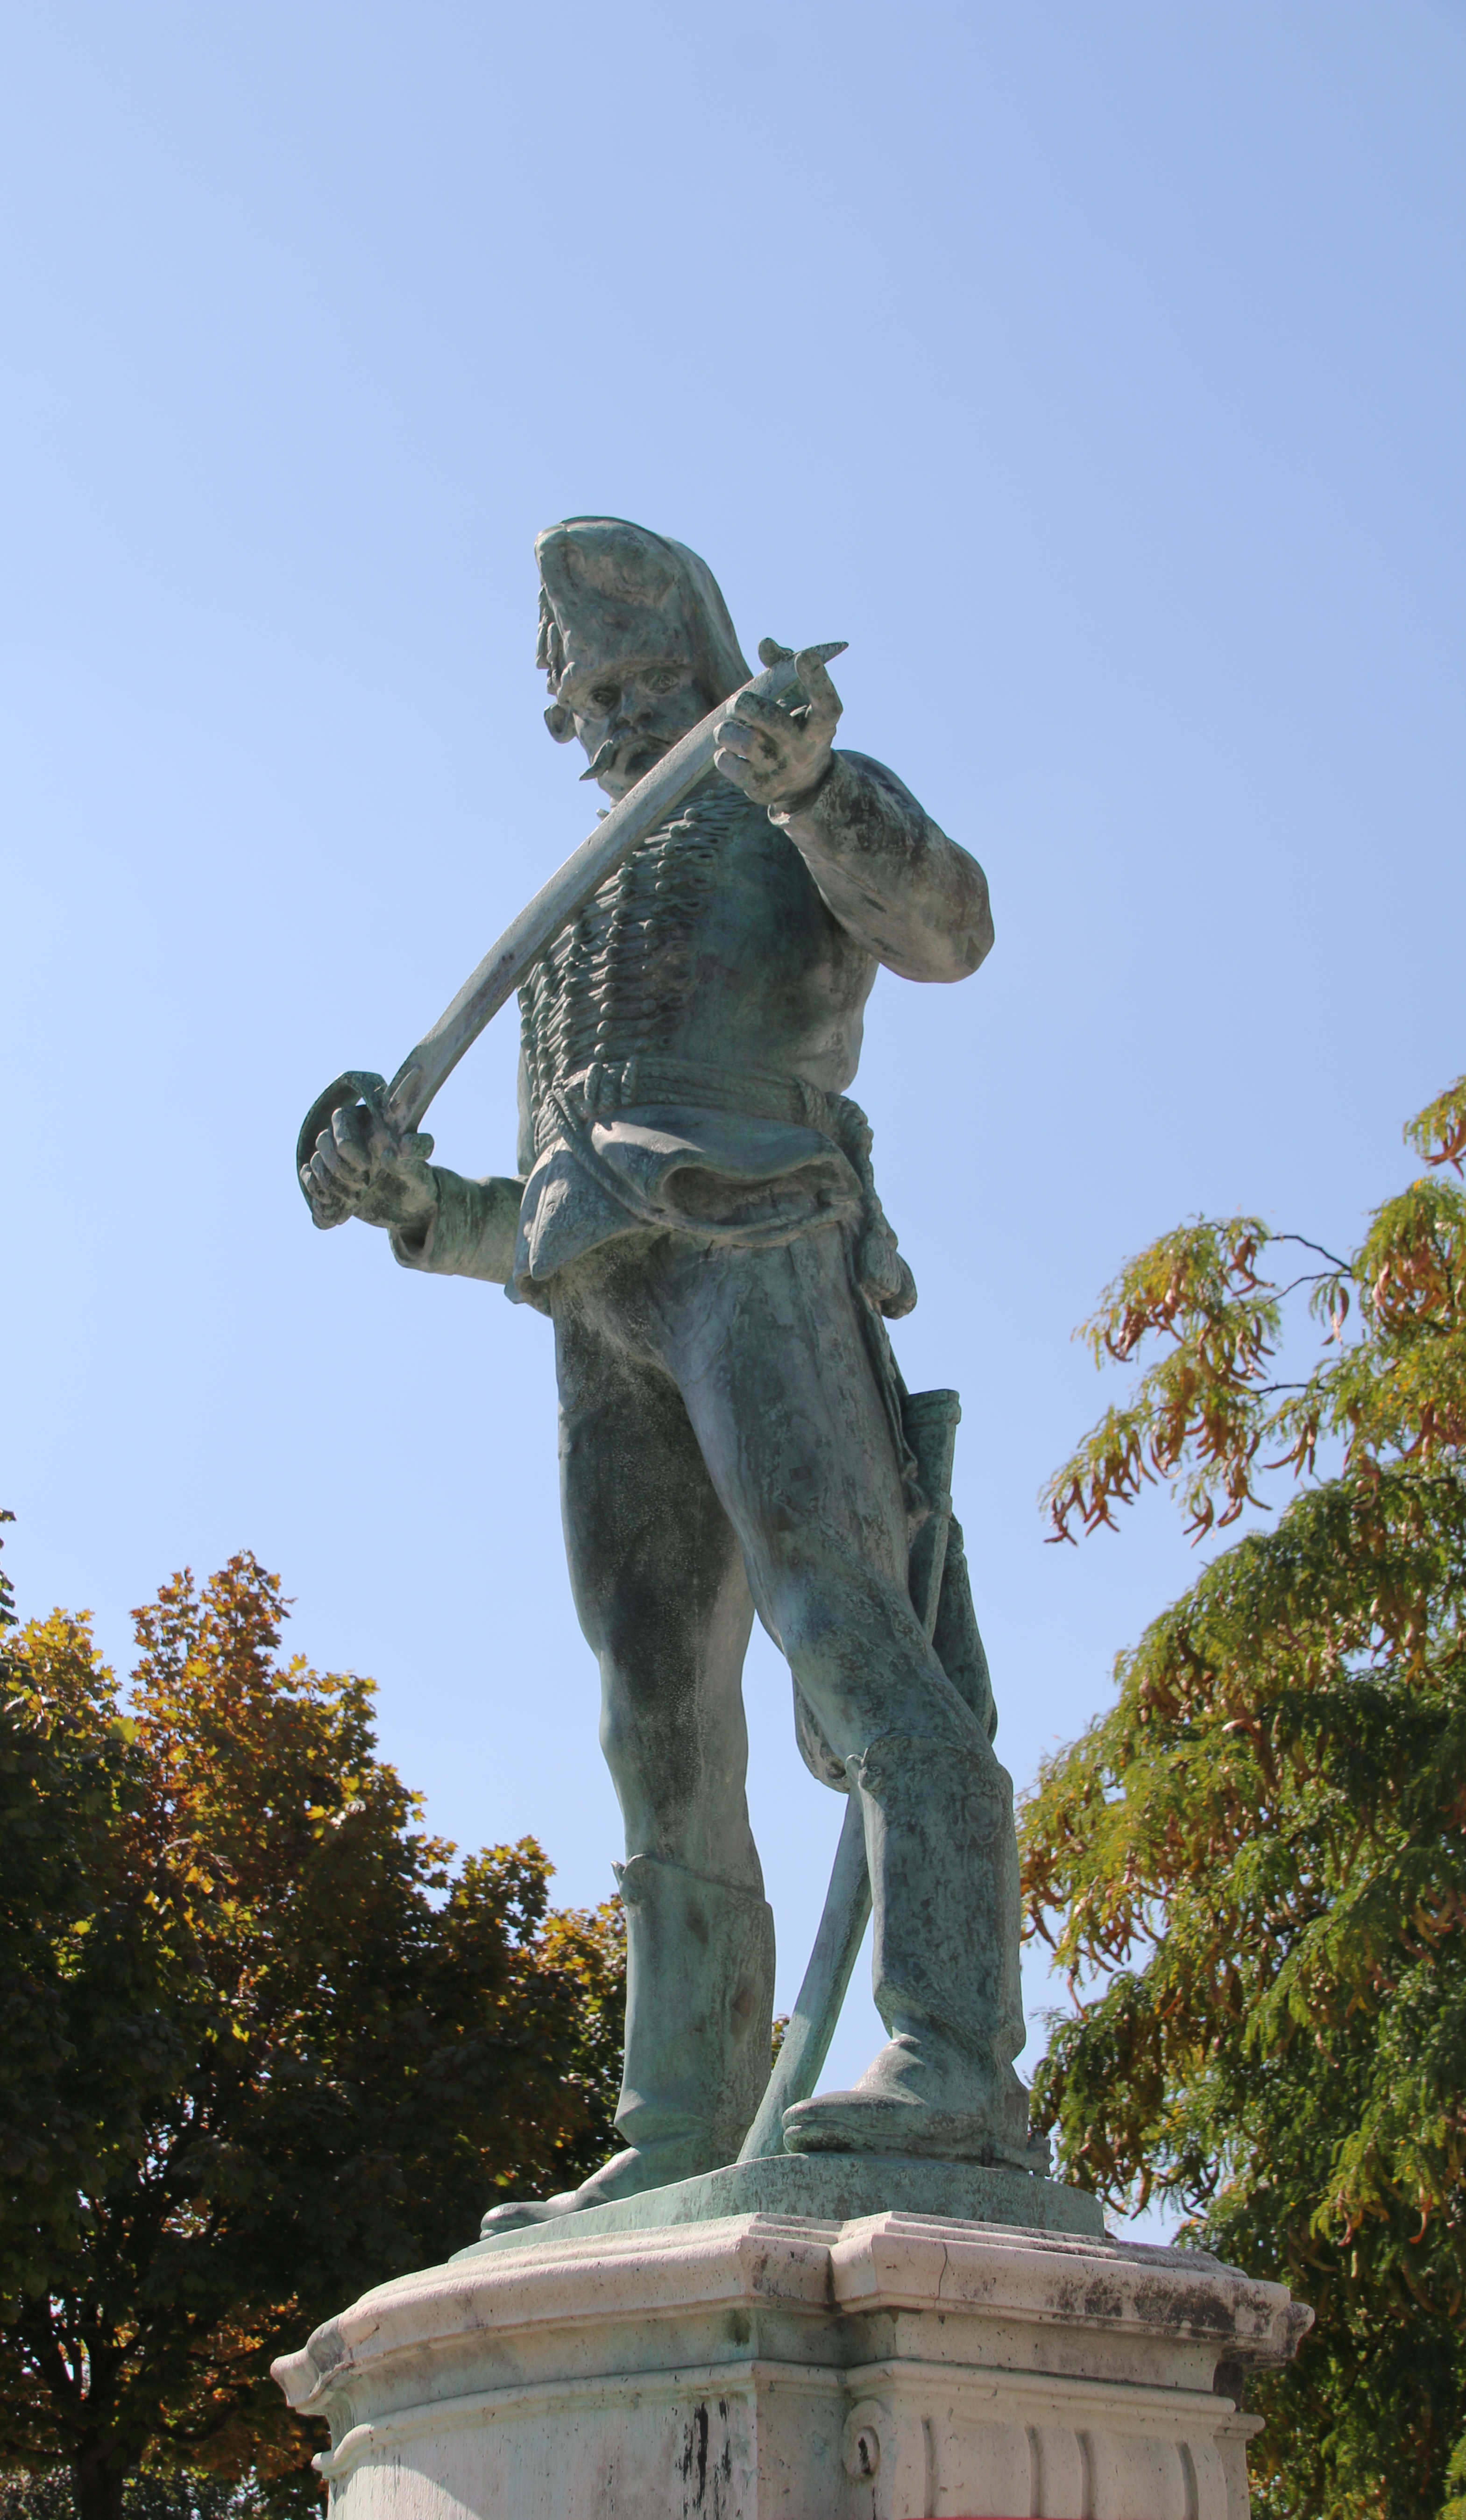 <span  class="uc_style_uc_tiles_grid_image_elementor_uc_items_attribute_title" style="color:#ffffff;">Statue</span>